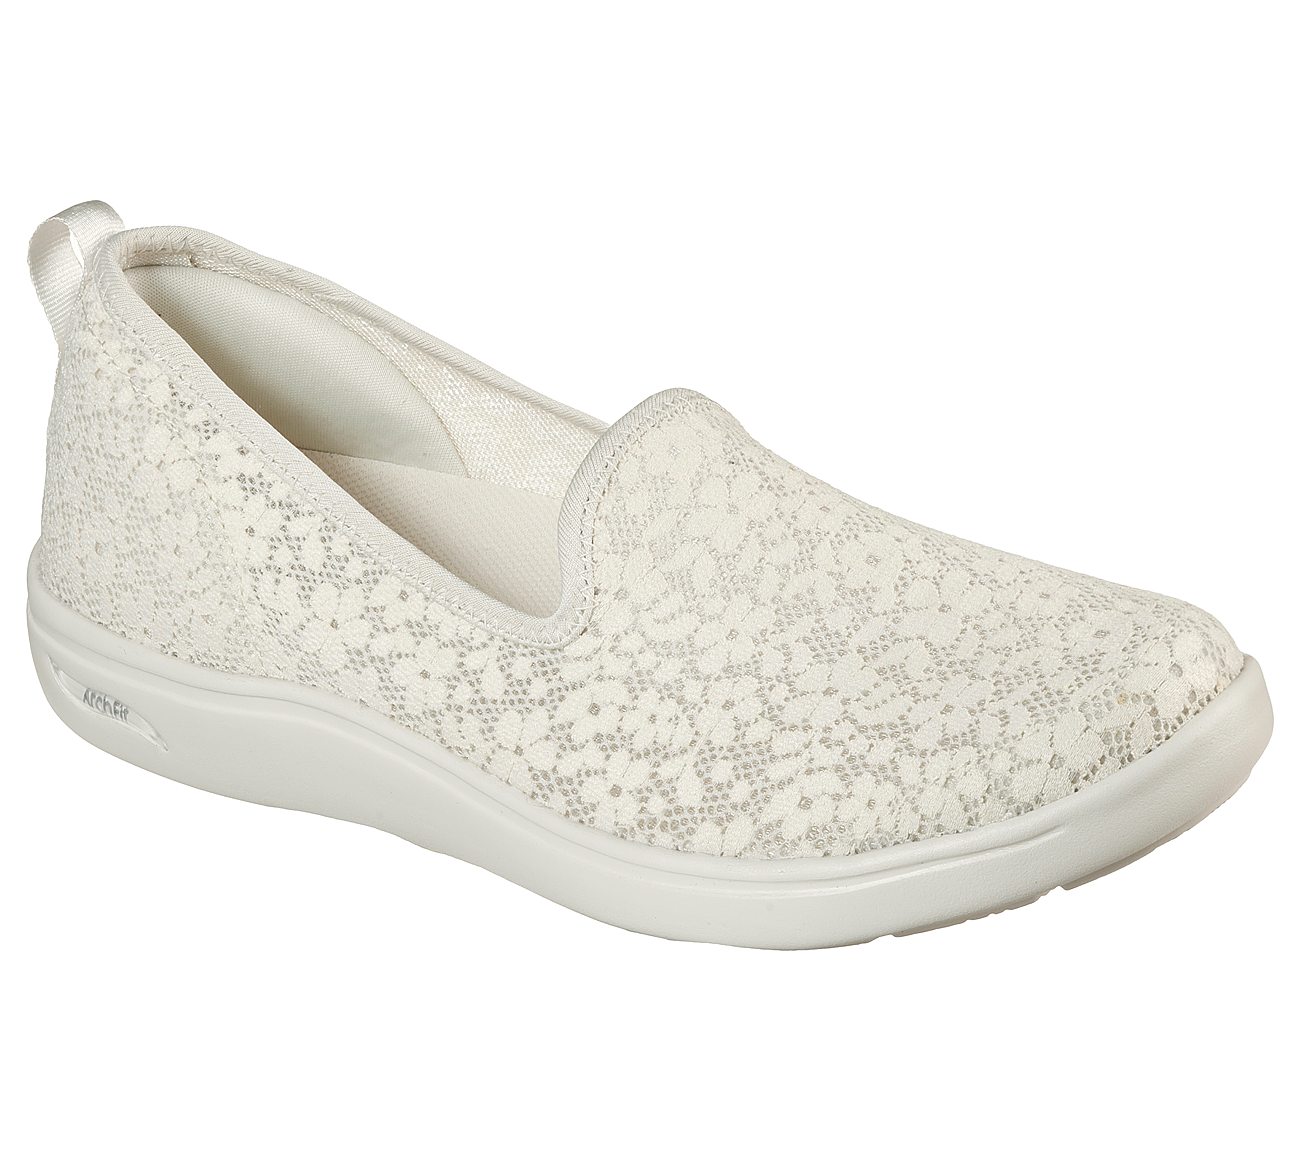 ARCH FIT UPLIFT - ROMANTIC, NATURAL Footwear Right View